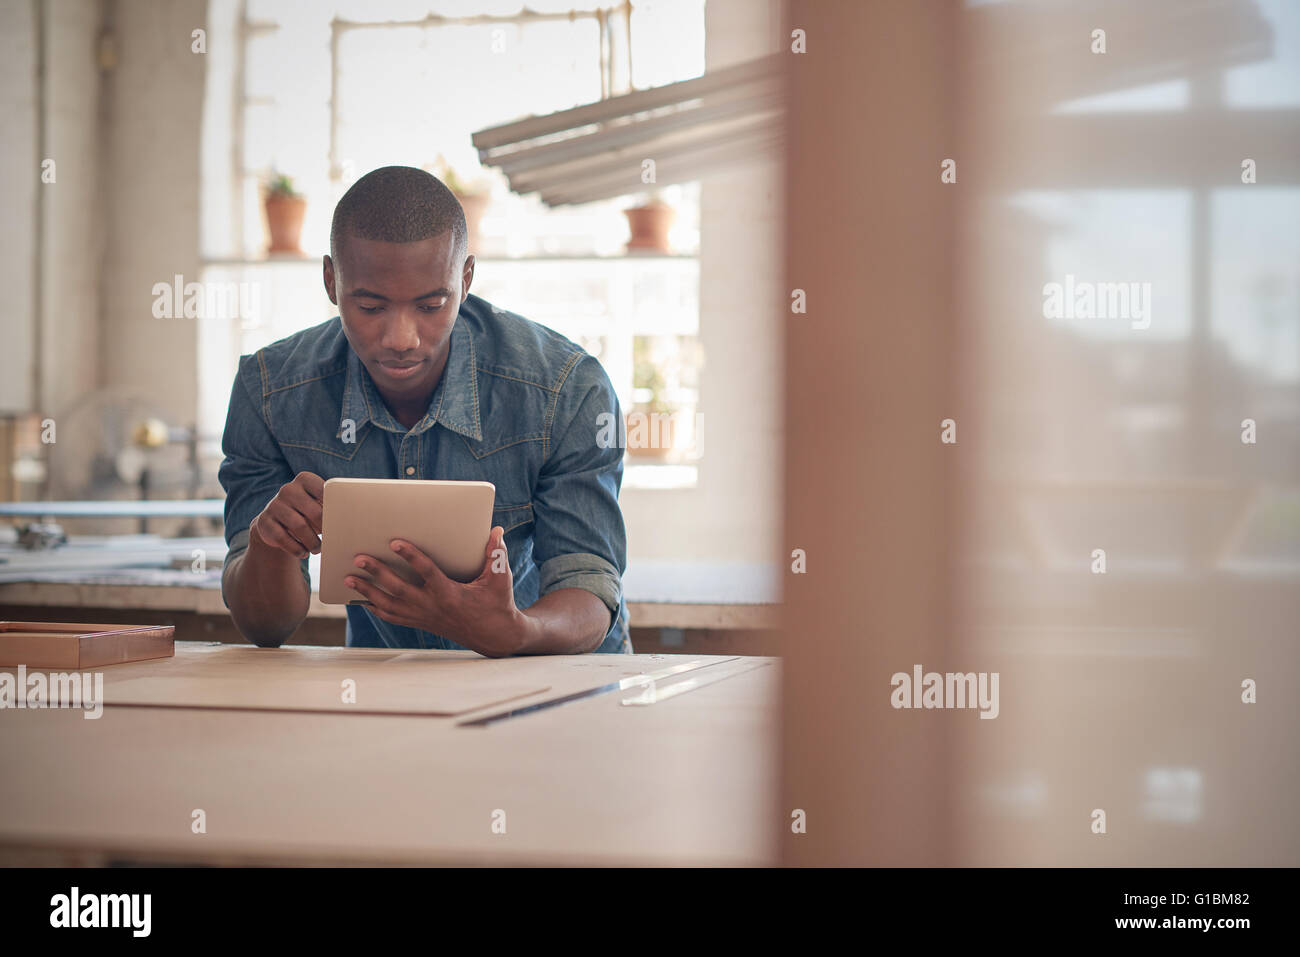 Handsome young entrpereneur of African descent, leaning on a work table in a design studio, using a digital tablet Stock Photo